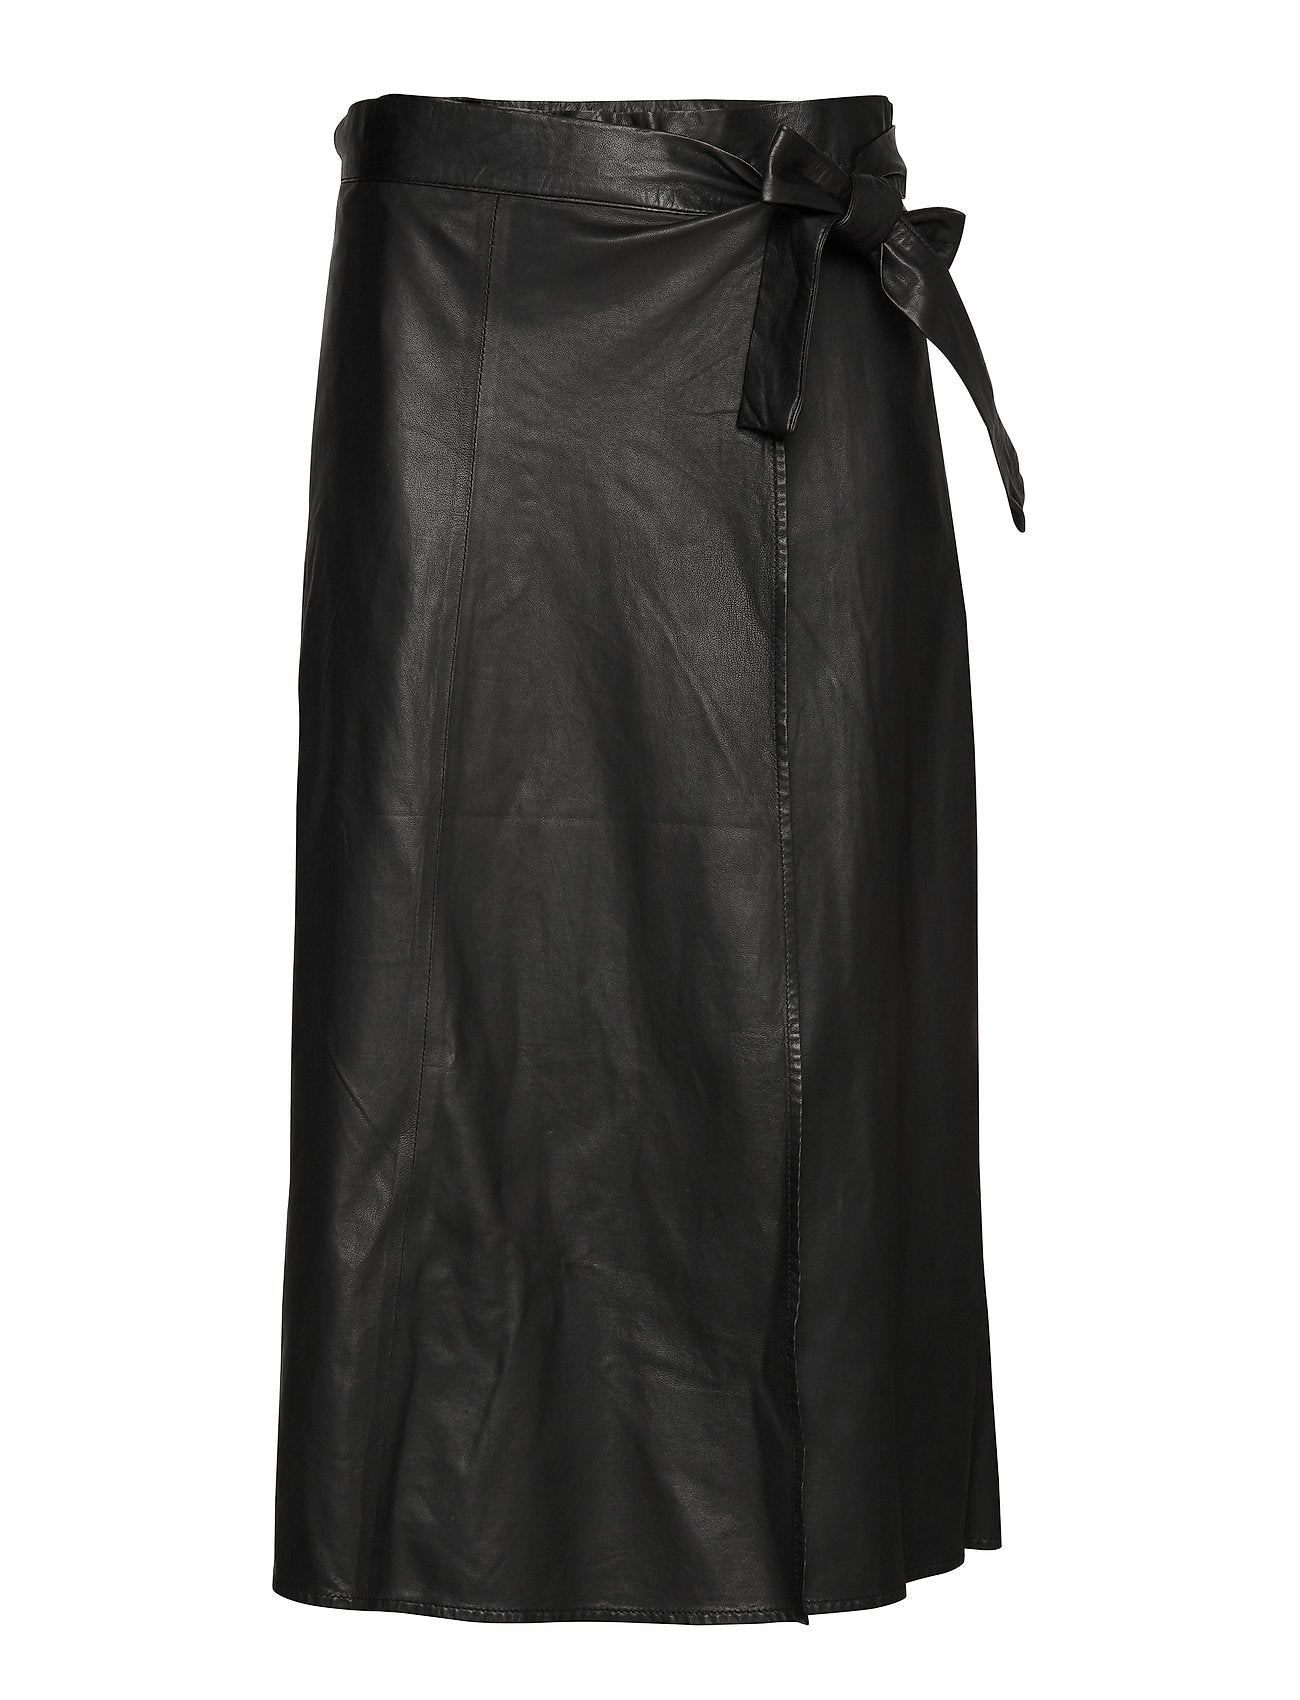 Adeline New Thin Leather Skirt